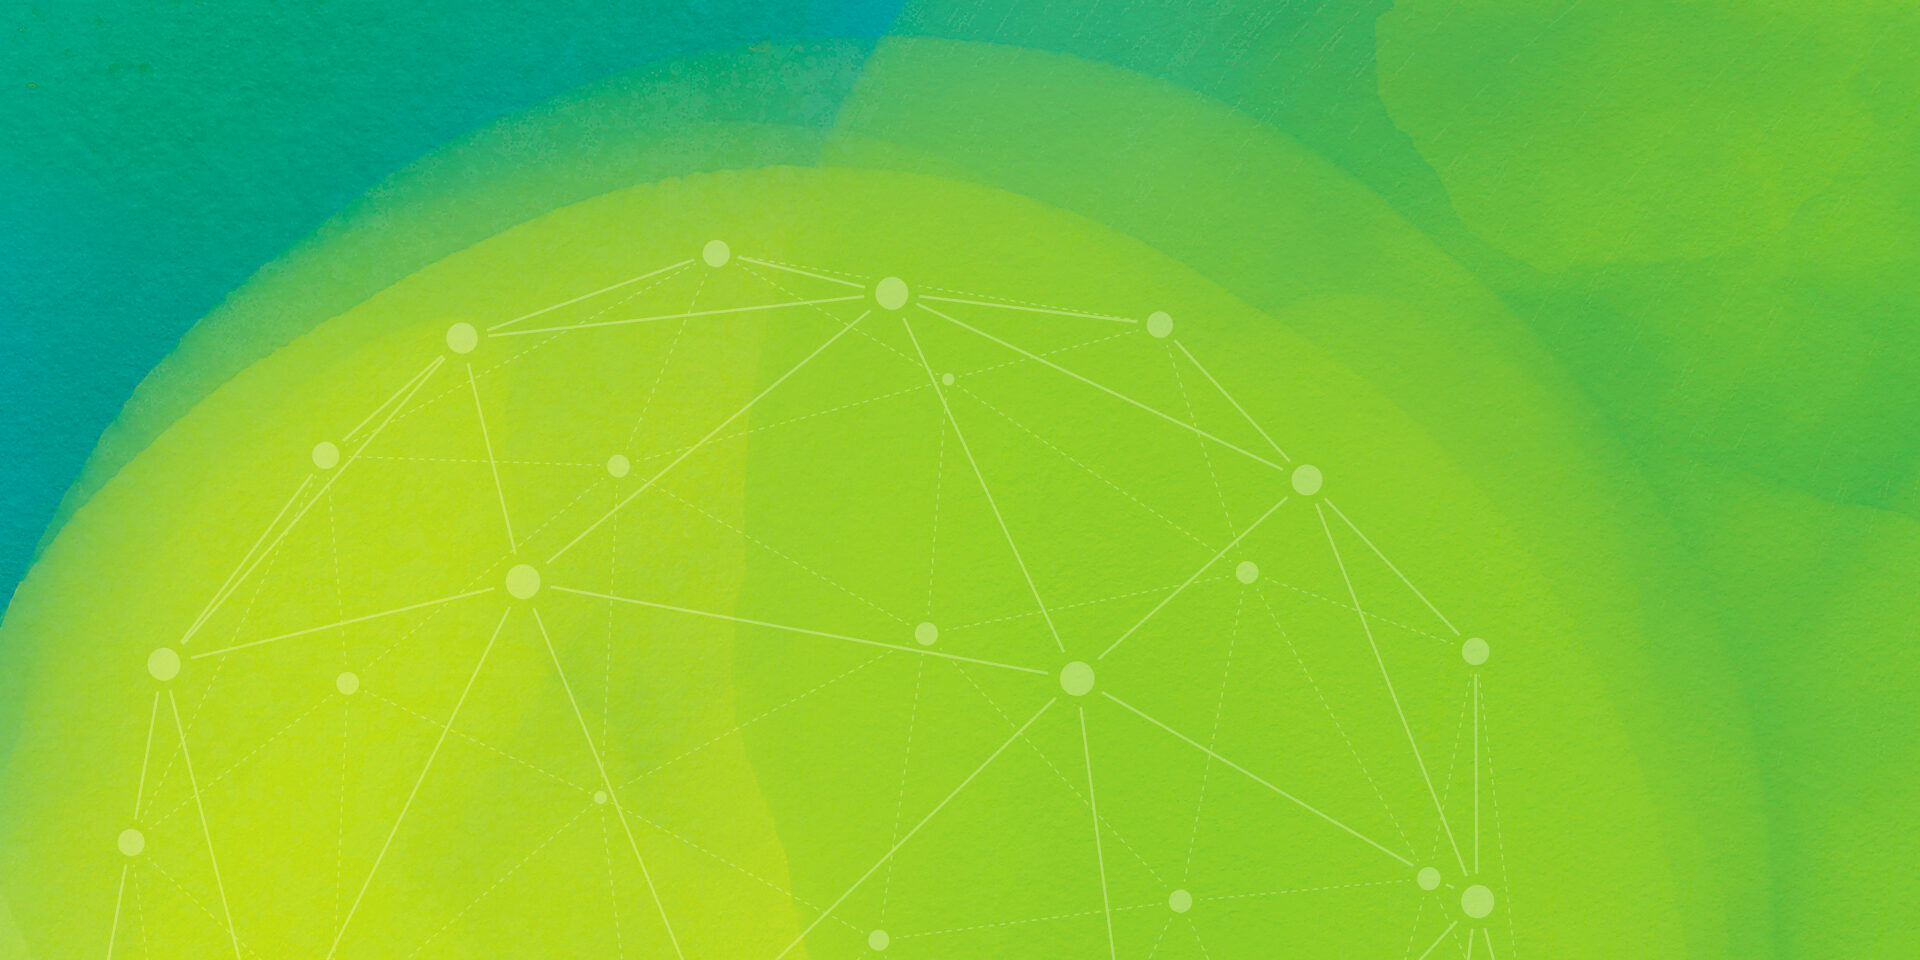 A bright green background in different shades with a spherical group of interconnecting lines in the foreground.